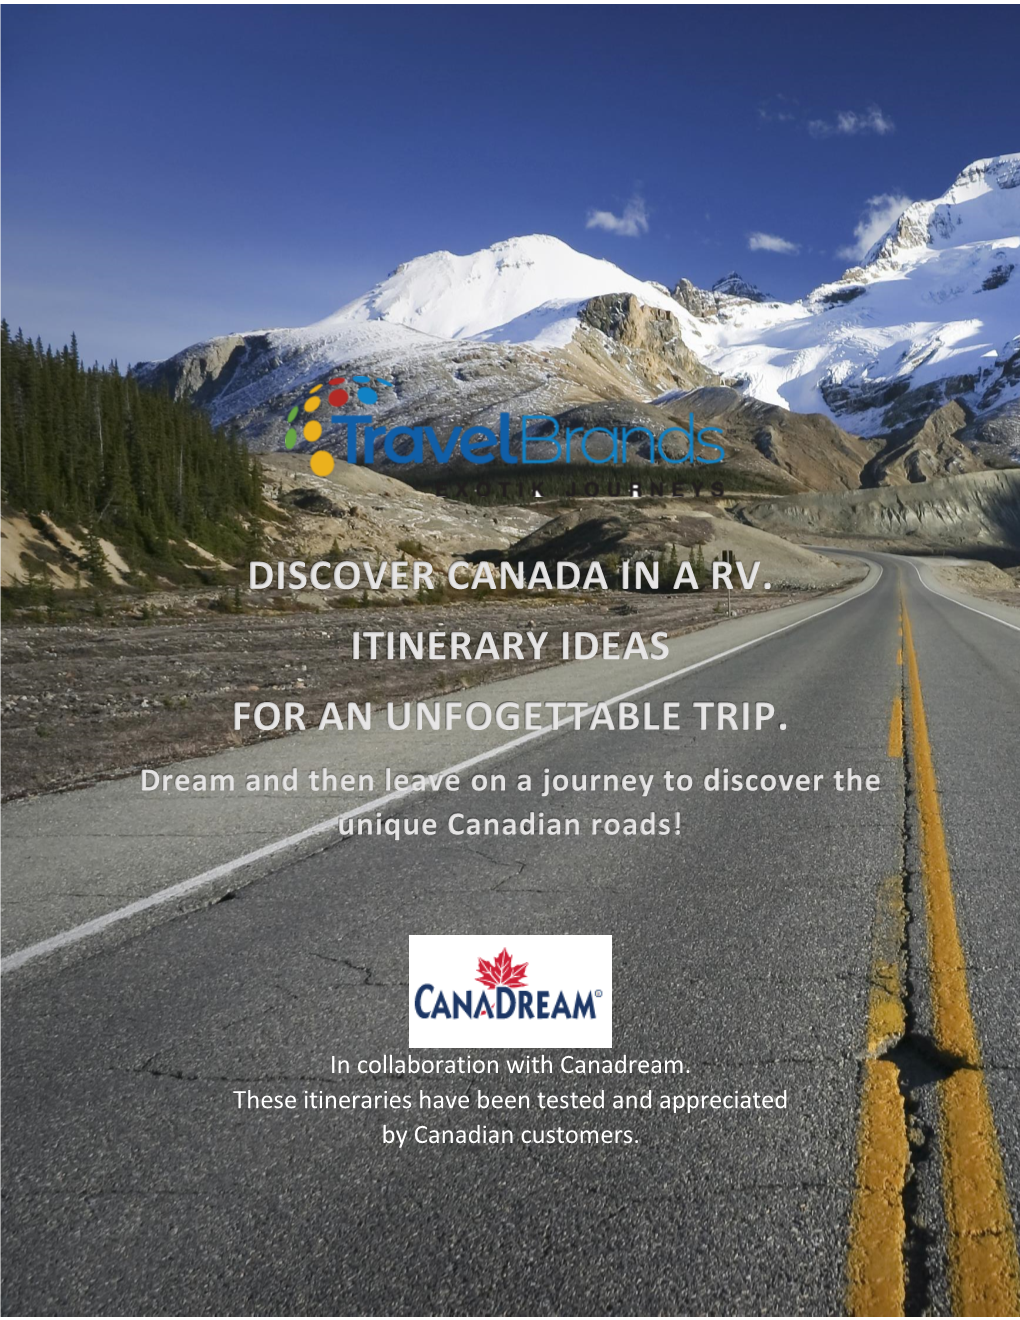 Discover Canada in a Rv. Itinerary Ideas for an Unfogettable Trip